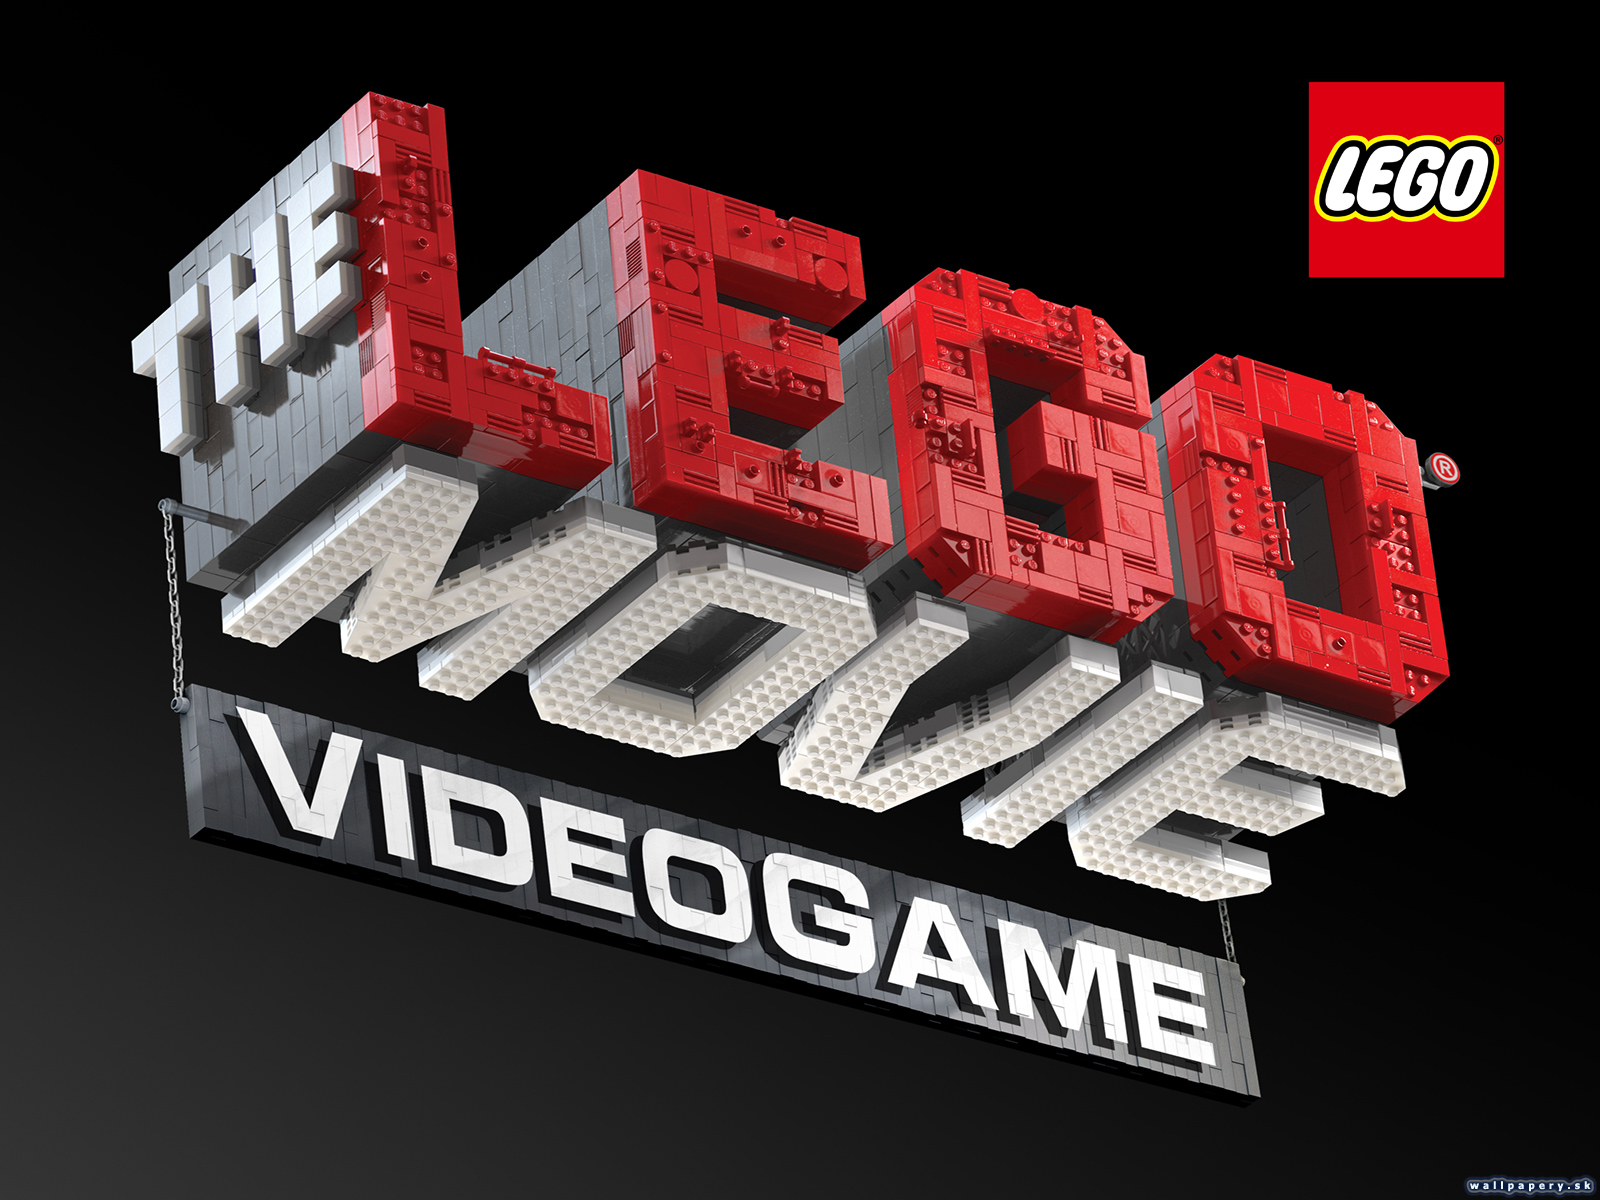 The LEGO Movie Videogame - wallpaper 2